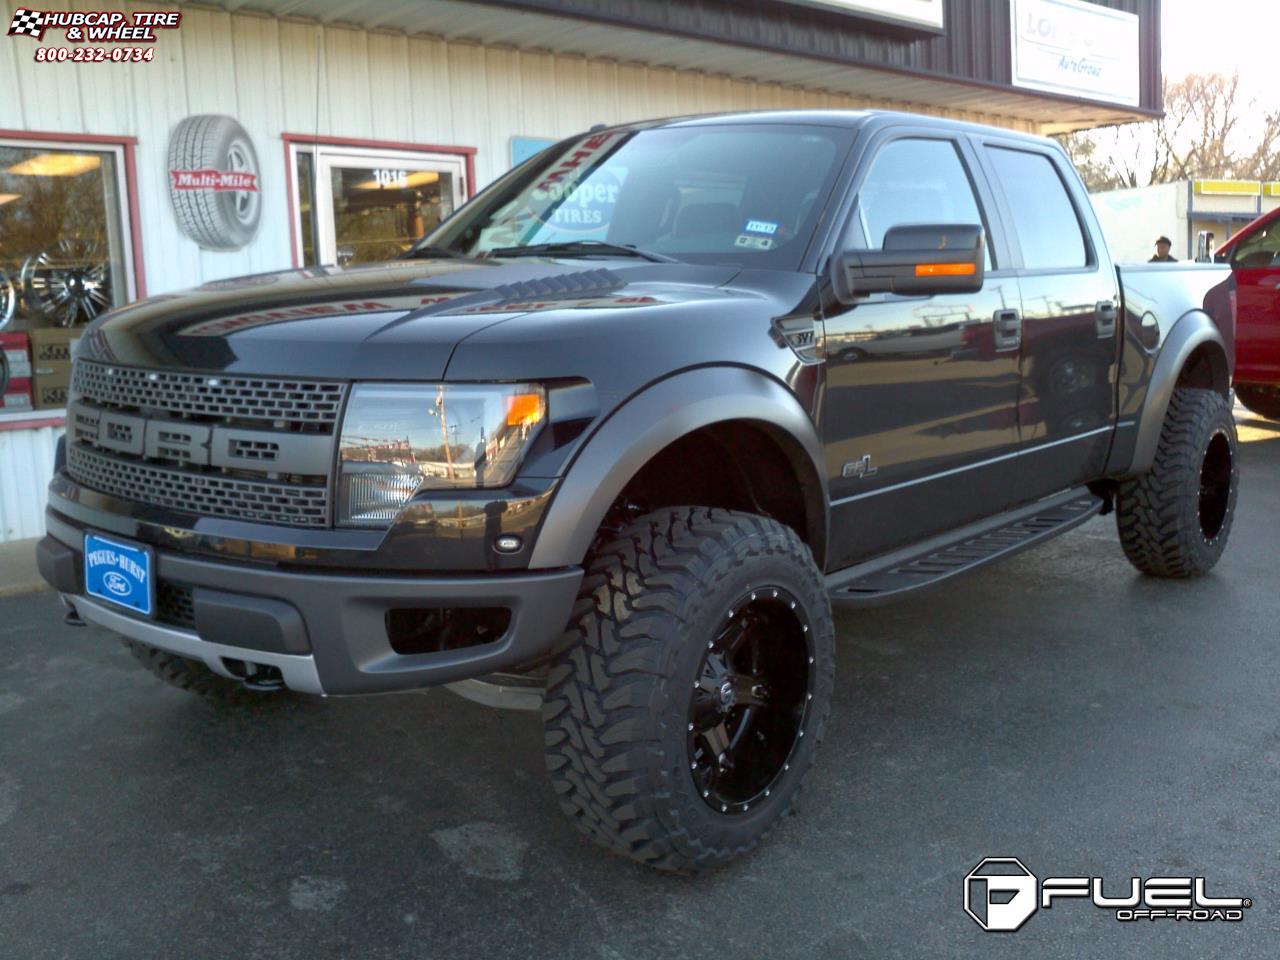 vehicle gallery/ford f 150 fuel driller d256 0X0  Black & Milled wheels and rims